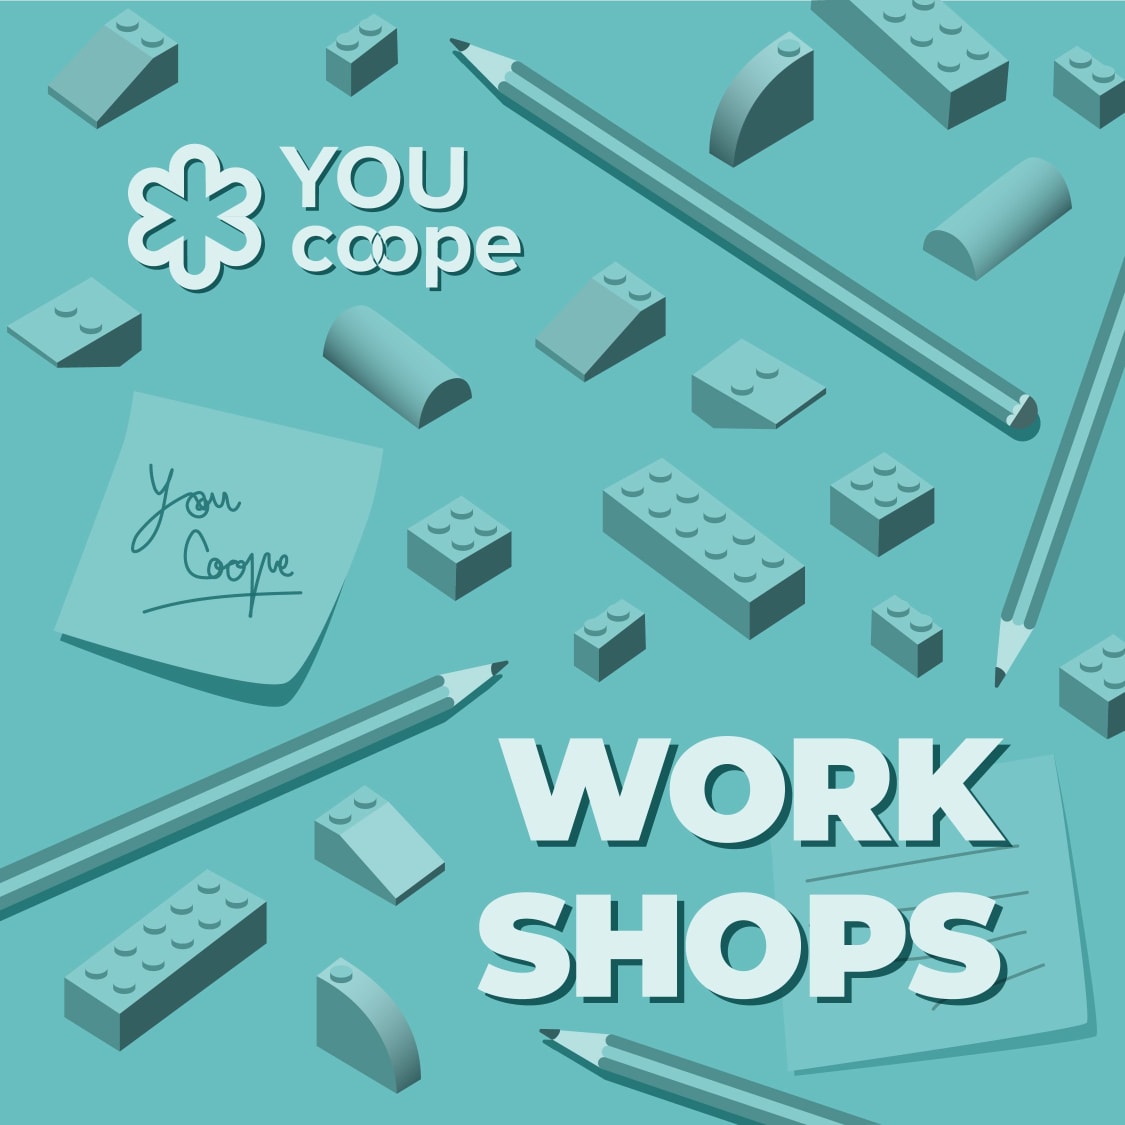 Graphic promoting Youcoope workshops